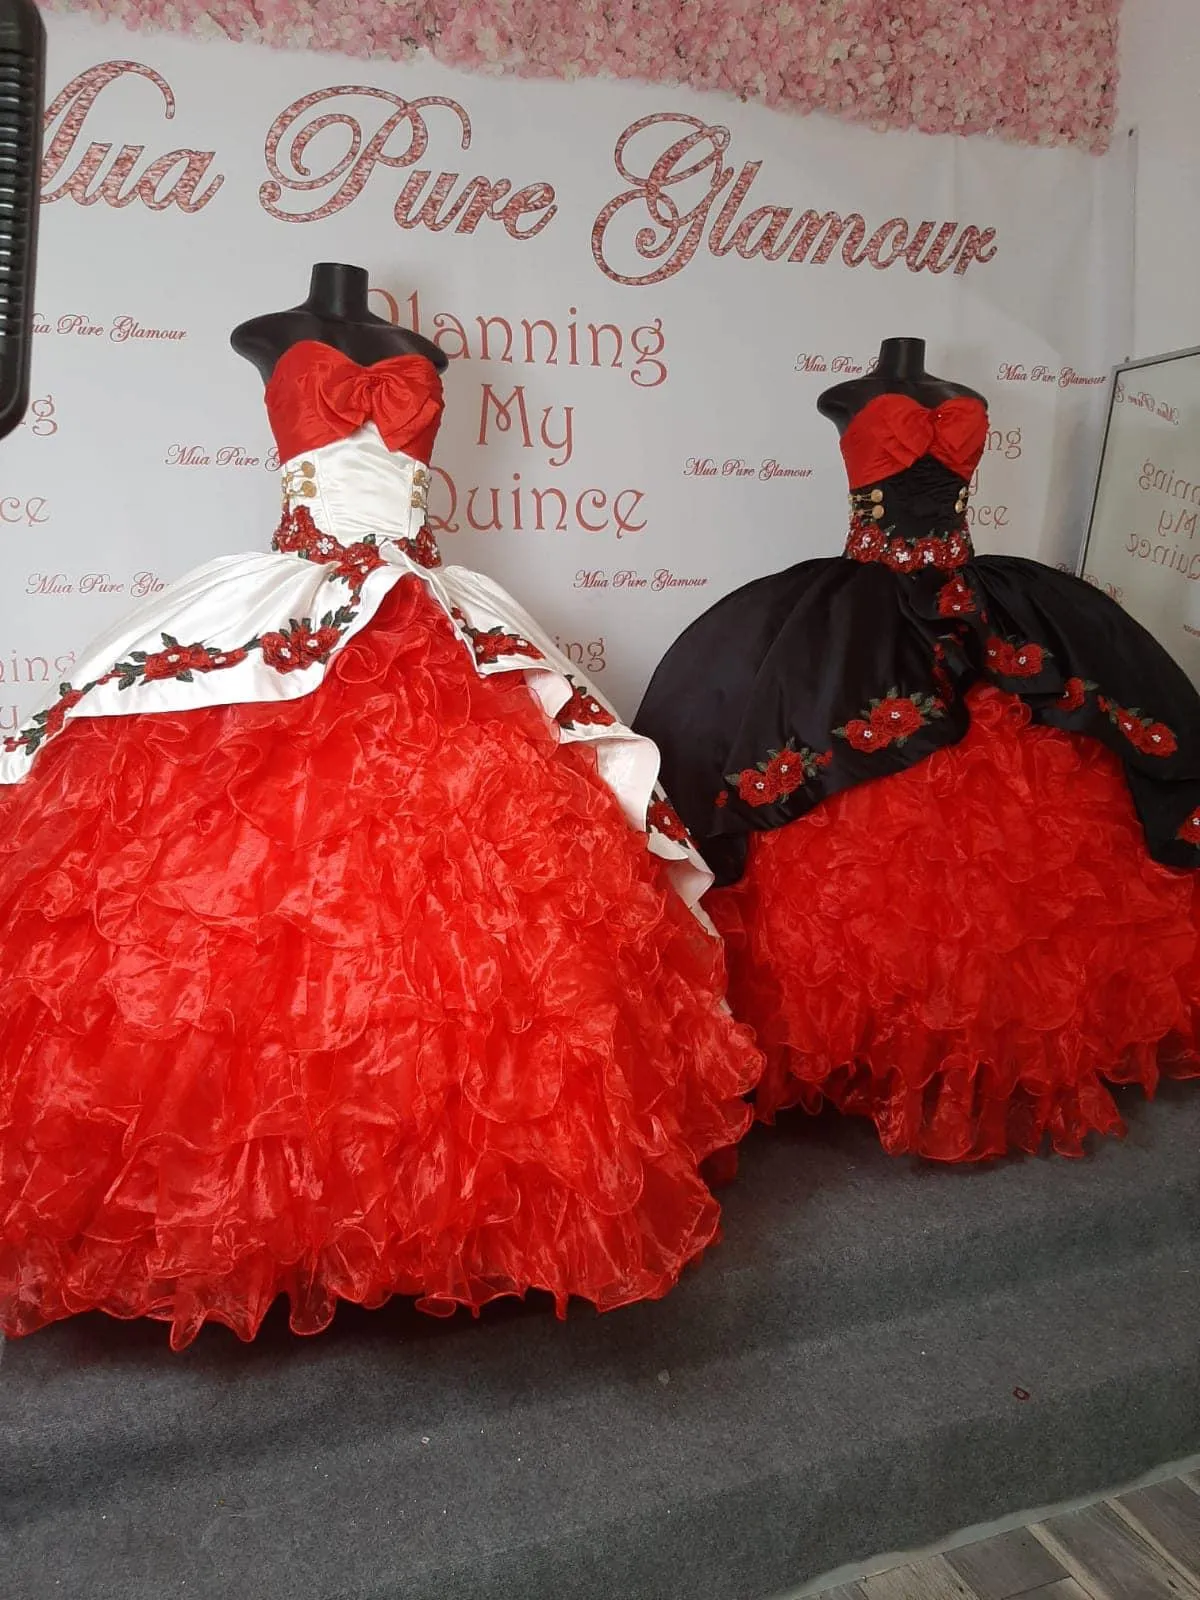 Vintage Bianco Rosso Nero Abiti Quinceanera Charro Mexican Sweet 15 Ragazze Applique floreale Perle Ball Gown Organza Ruffle Puffy Prom Dress Gowns